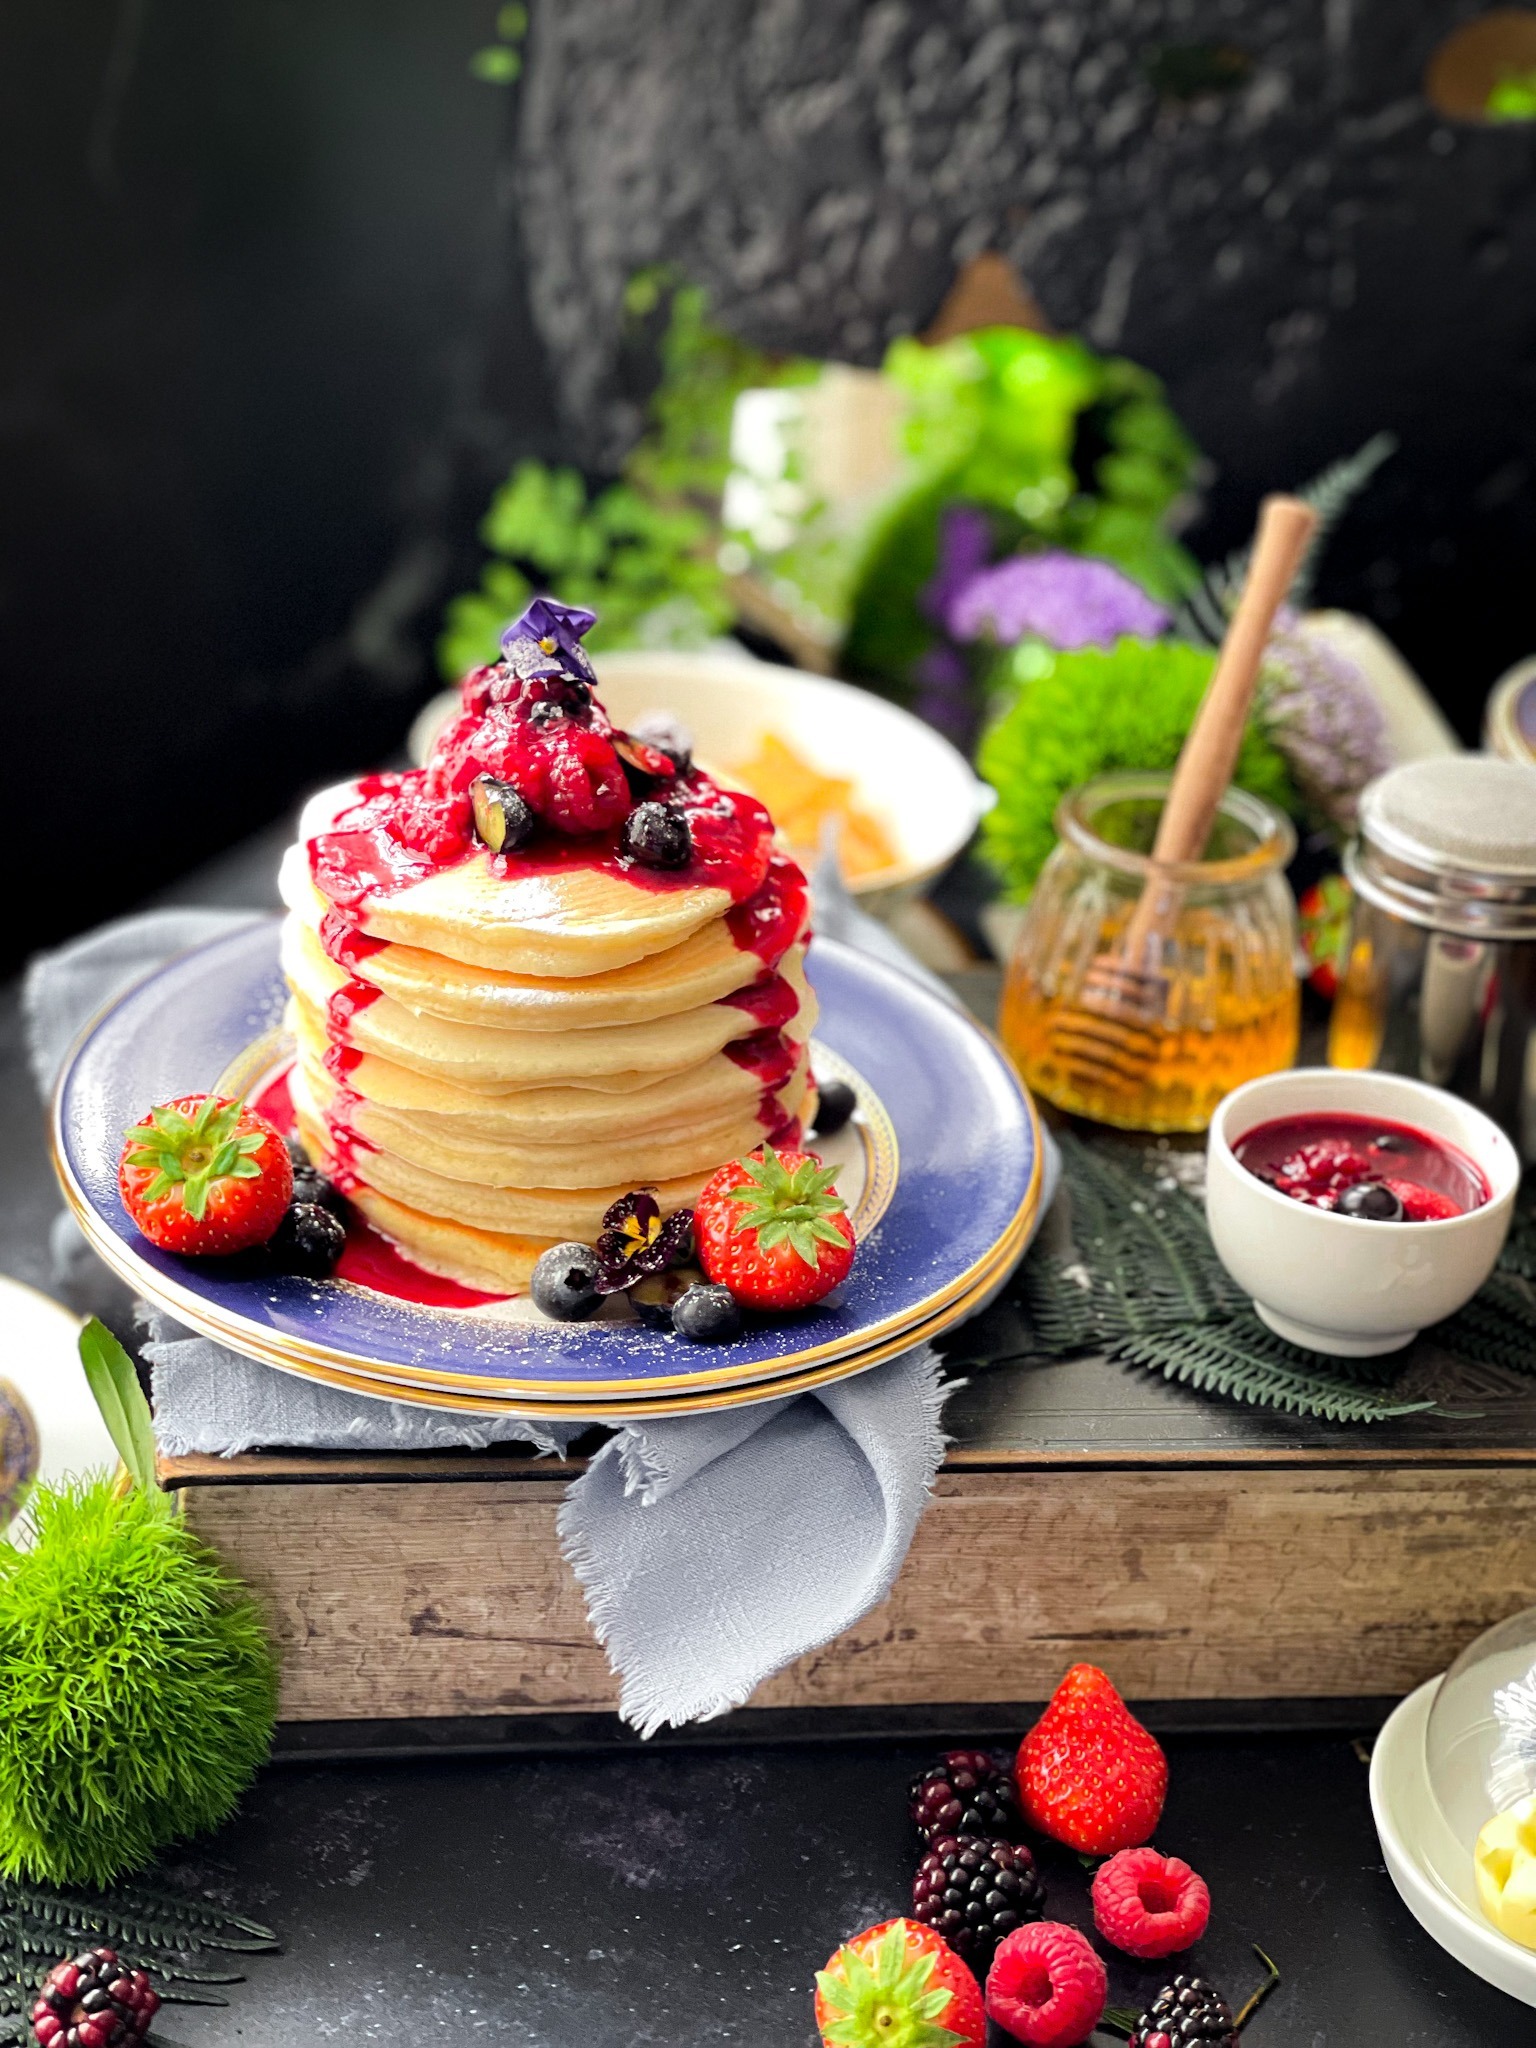 Fluffy Pancakes With Berry Compote - Poetry of Spices